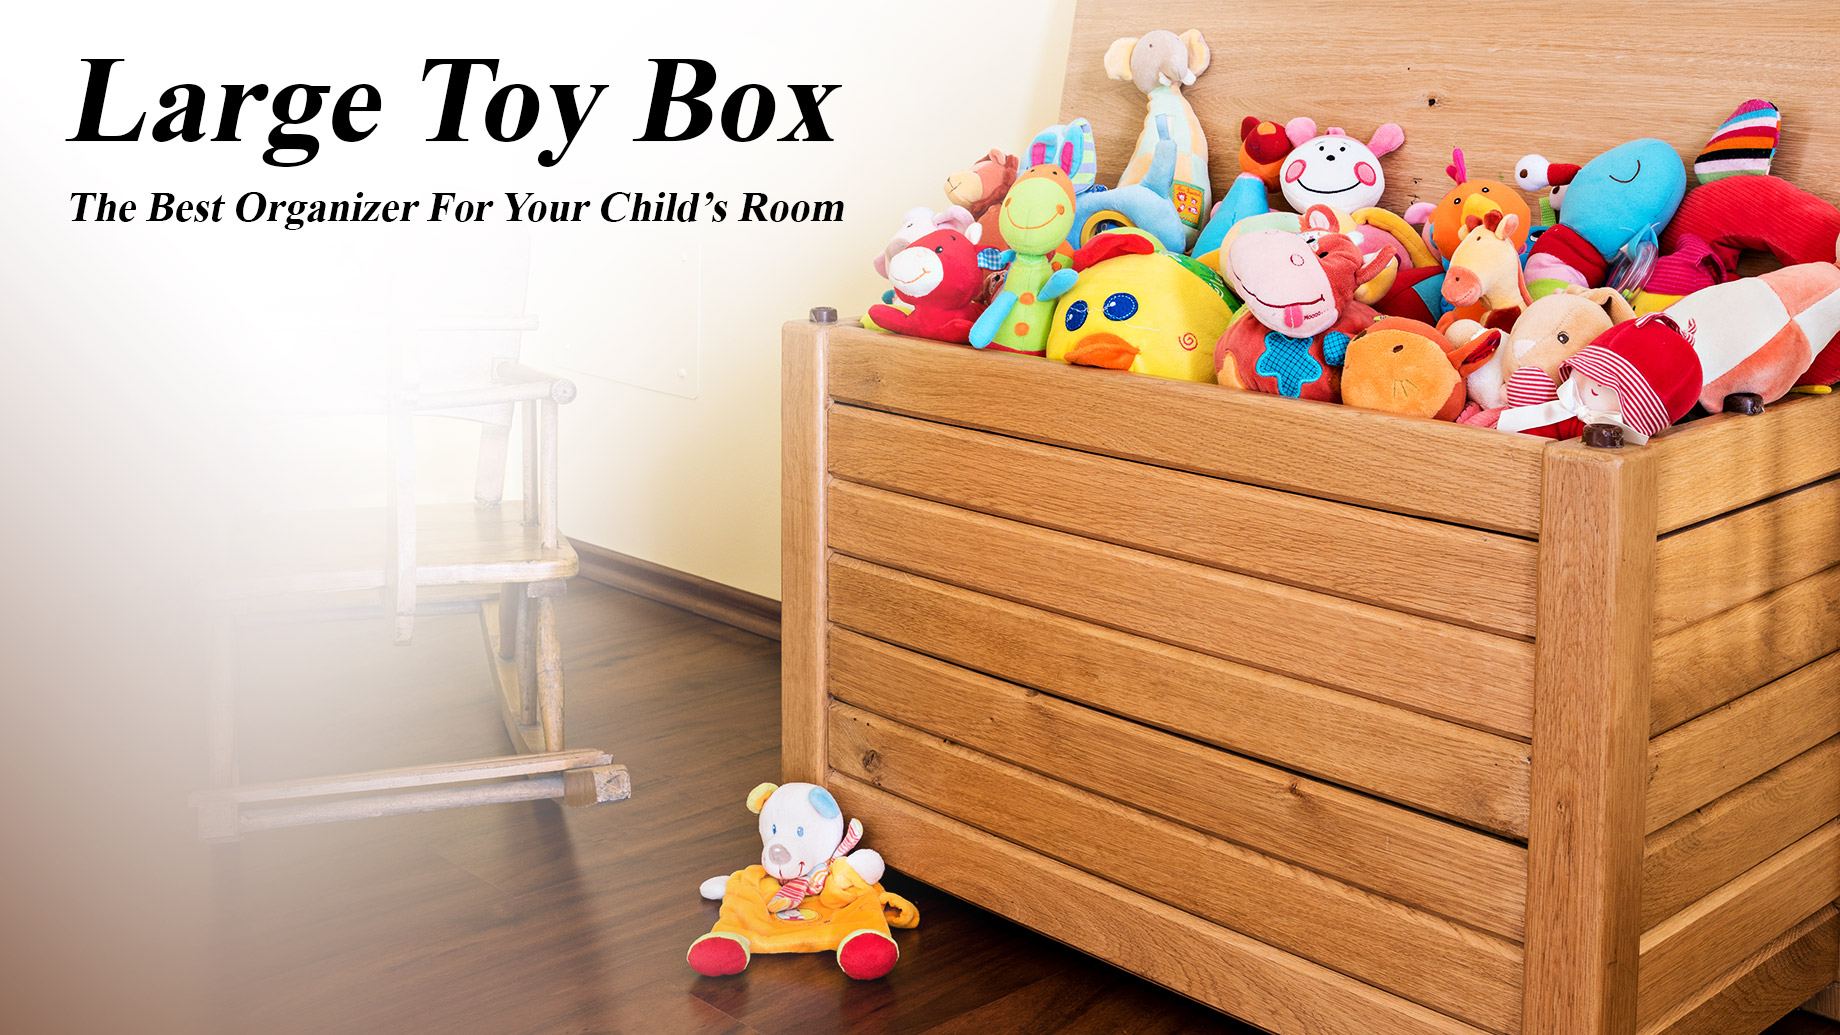 Large Toy Box - The Best Organizer For Your Child's Room